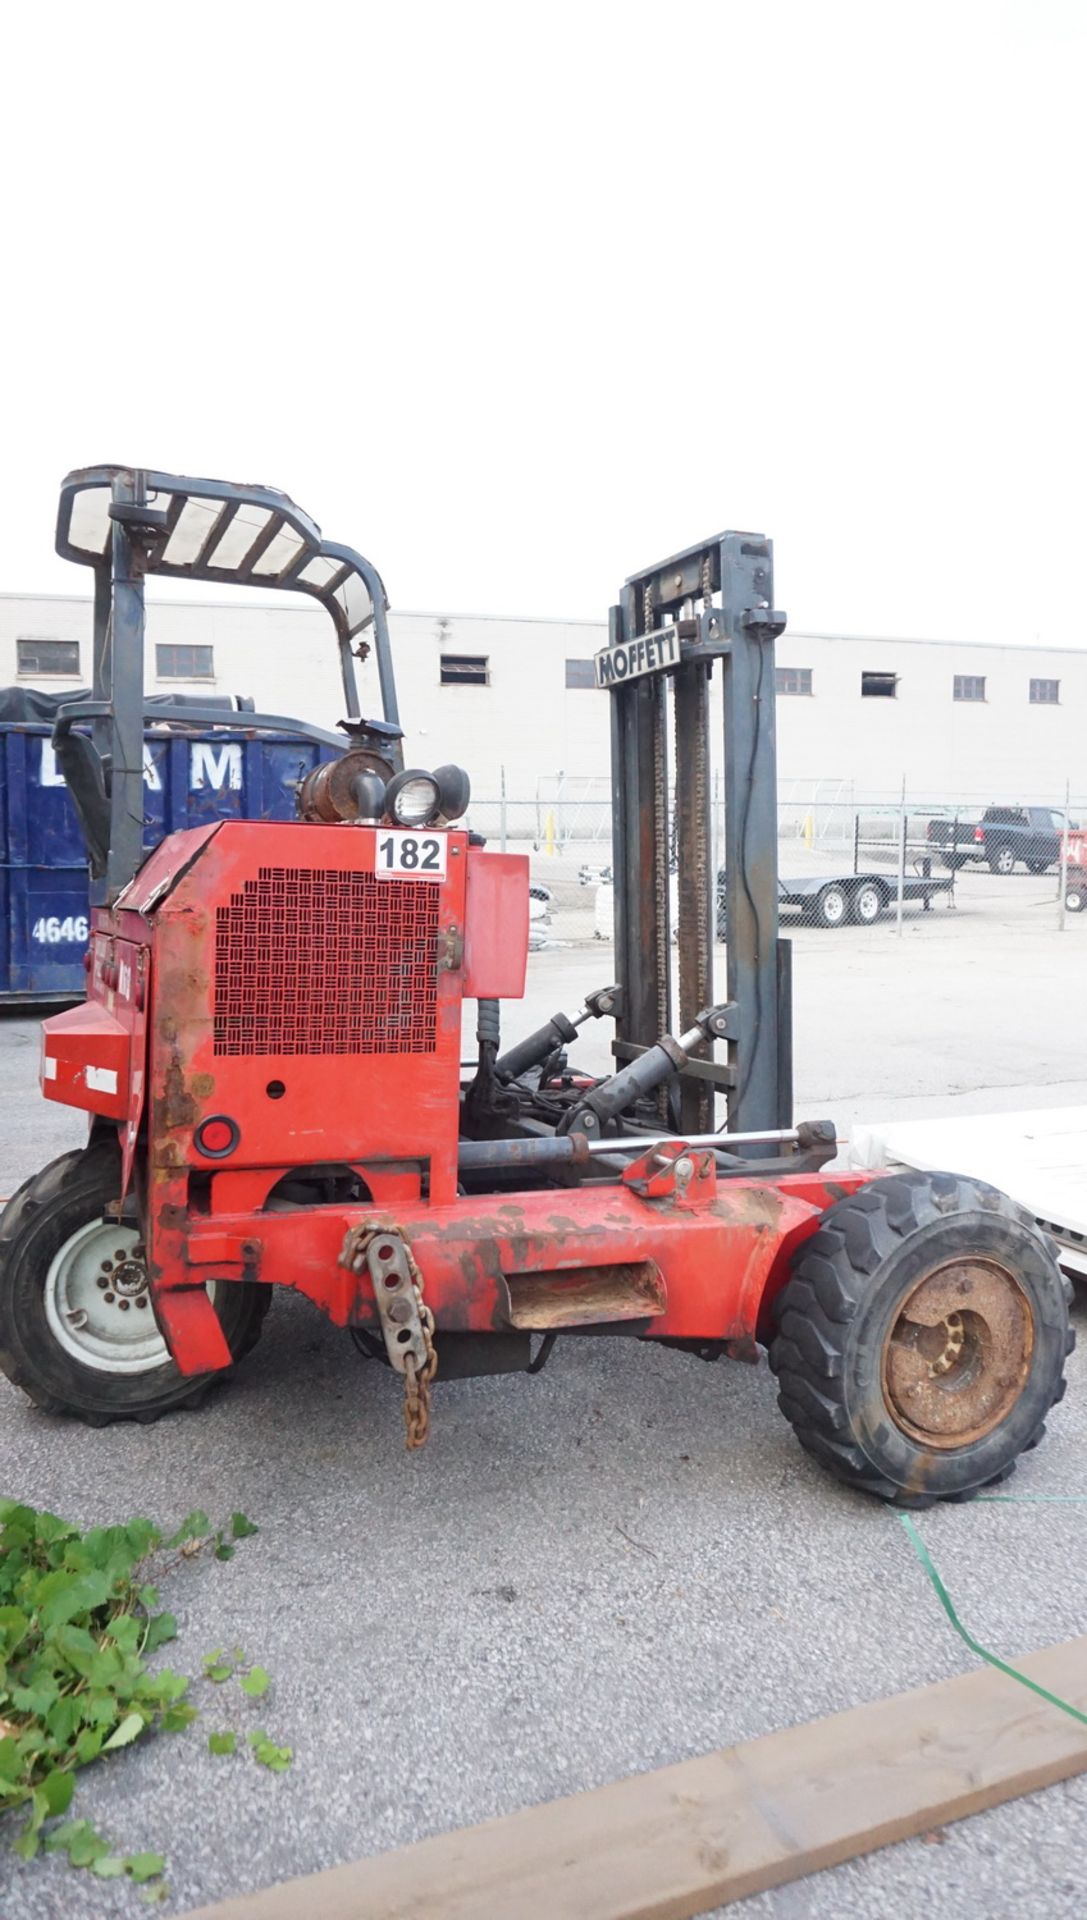 2001 MOFFETT M5000W-4W 5,000LBS CAP TRUCK MOUNTED PIGGY PACK DIESEL FORKLIFT W/ 2-STAGE MAST, & SIDE - Image 3 of 5